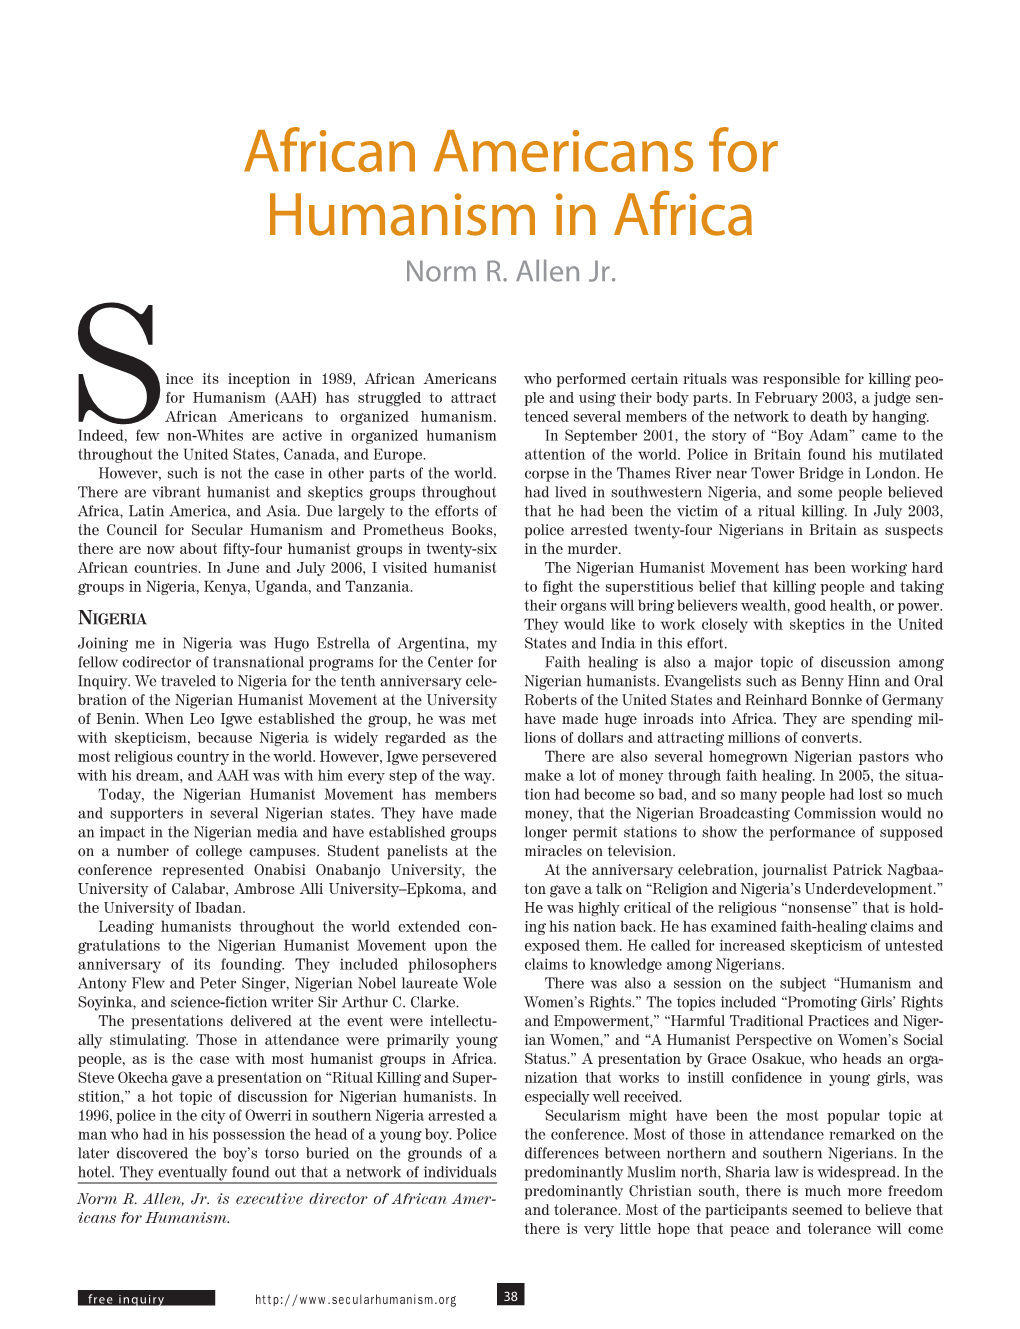 African Americans for Humanism in Africa Norm R